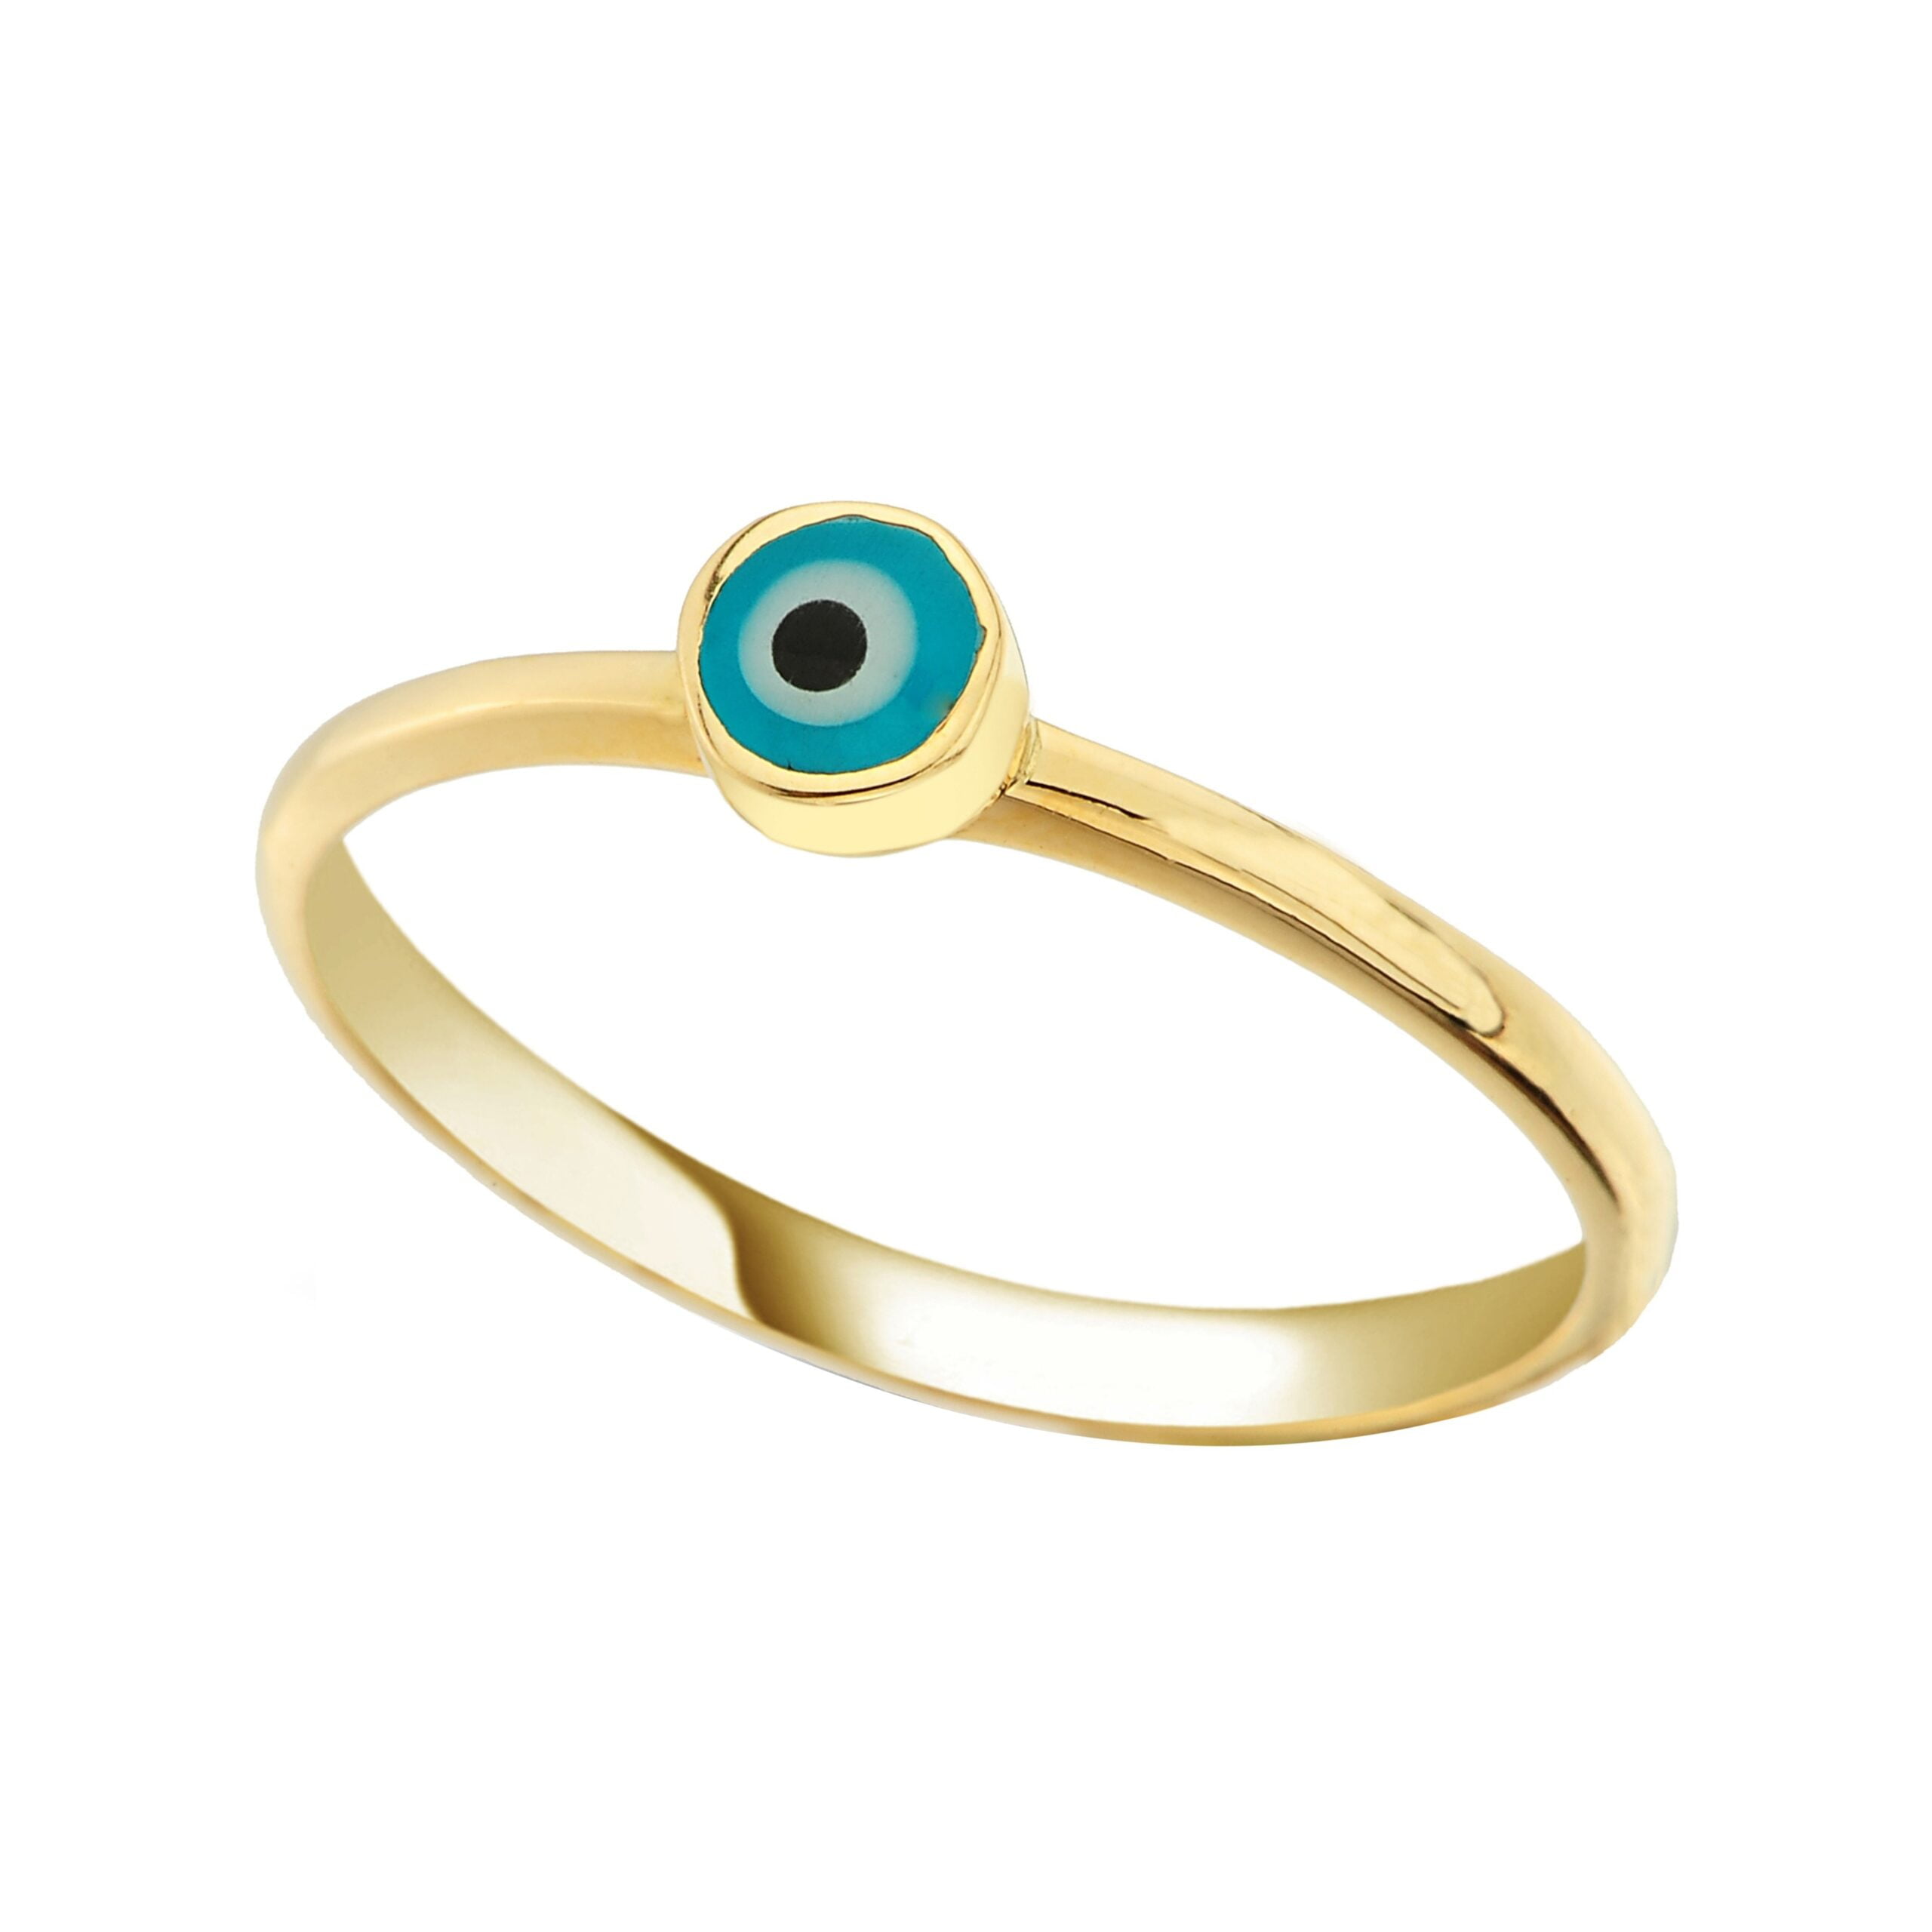 Evil Eye Ring Lucky Luck Nazar Protection For Women Jewelry 14K Yellow Gold Turquoise or Navy Blue Turkish Dainty greek birthday gift